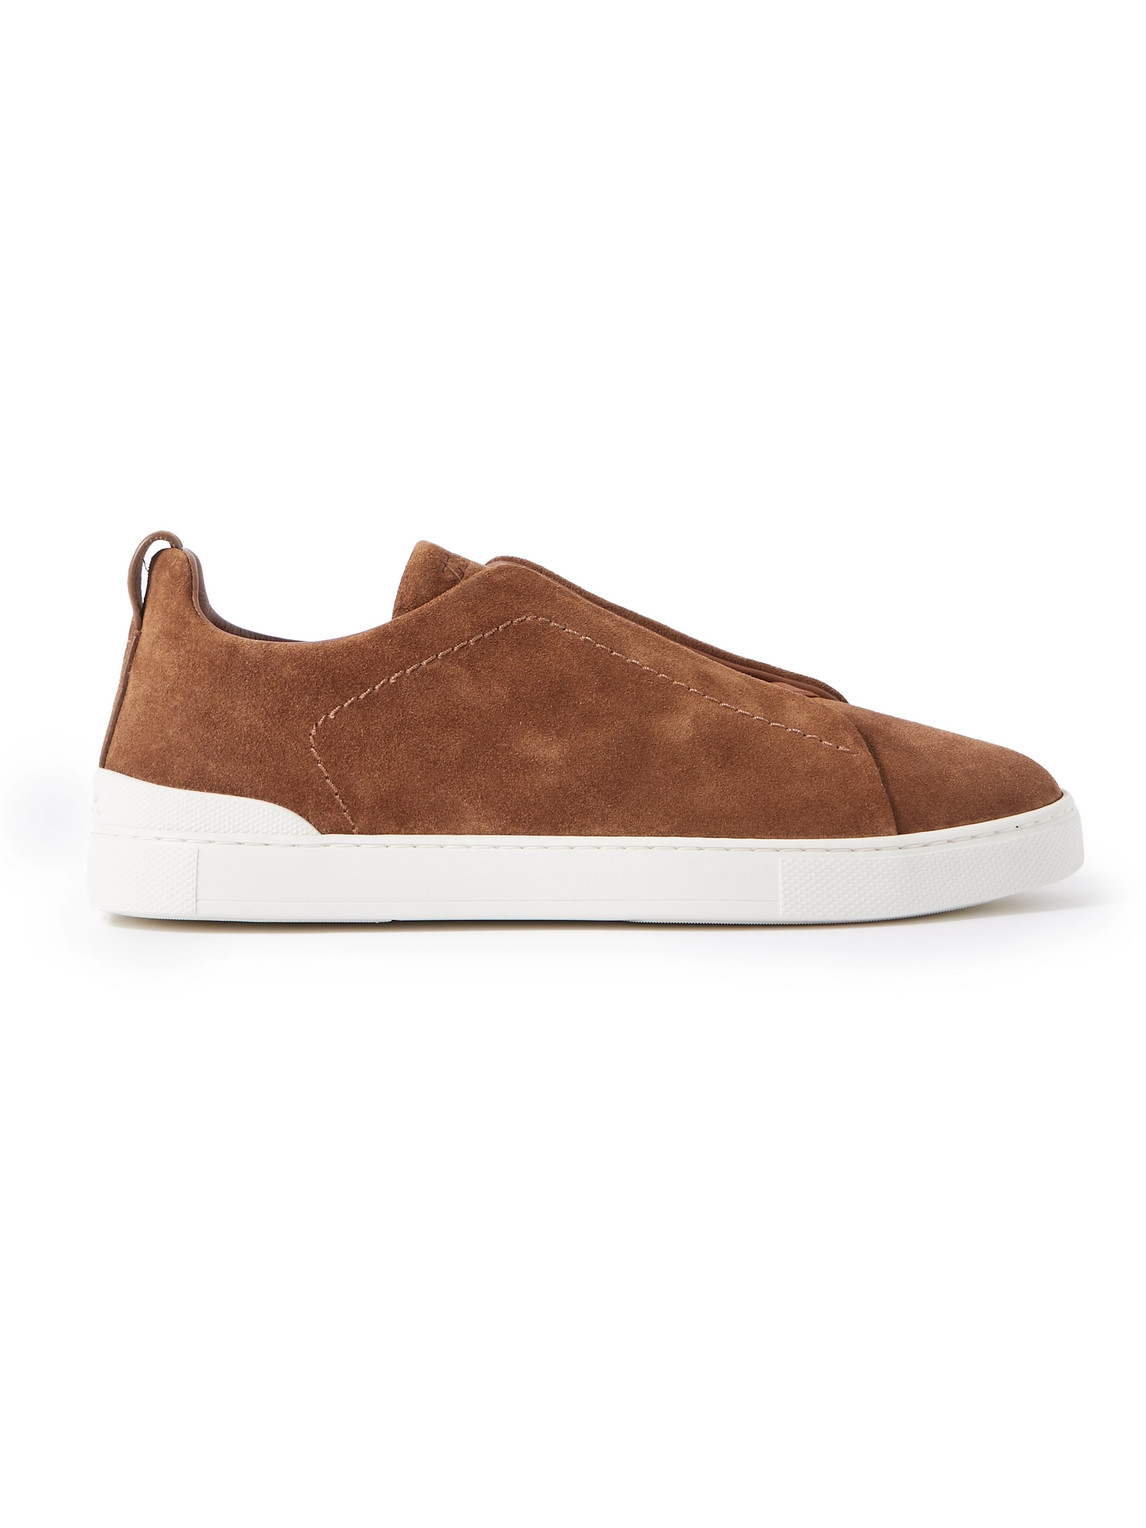 ZEGNA TRIPLE STITCH SUEDE SNEAKERS